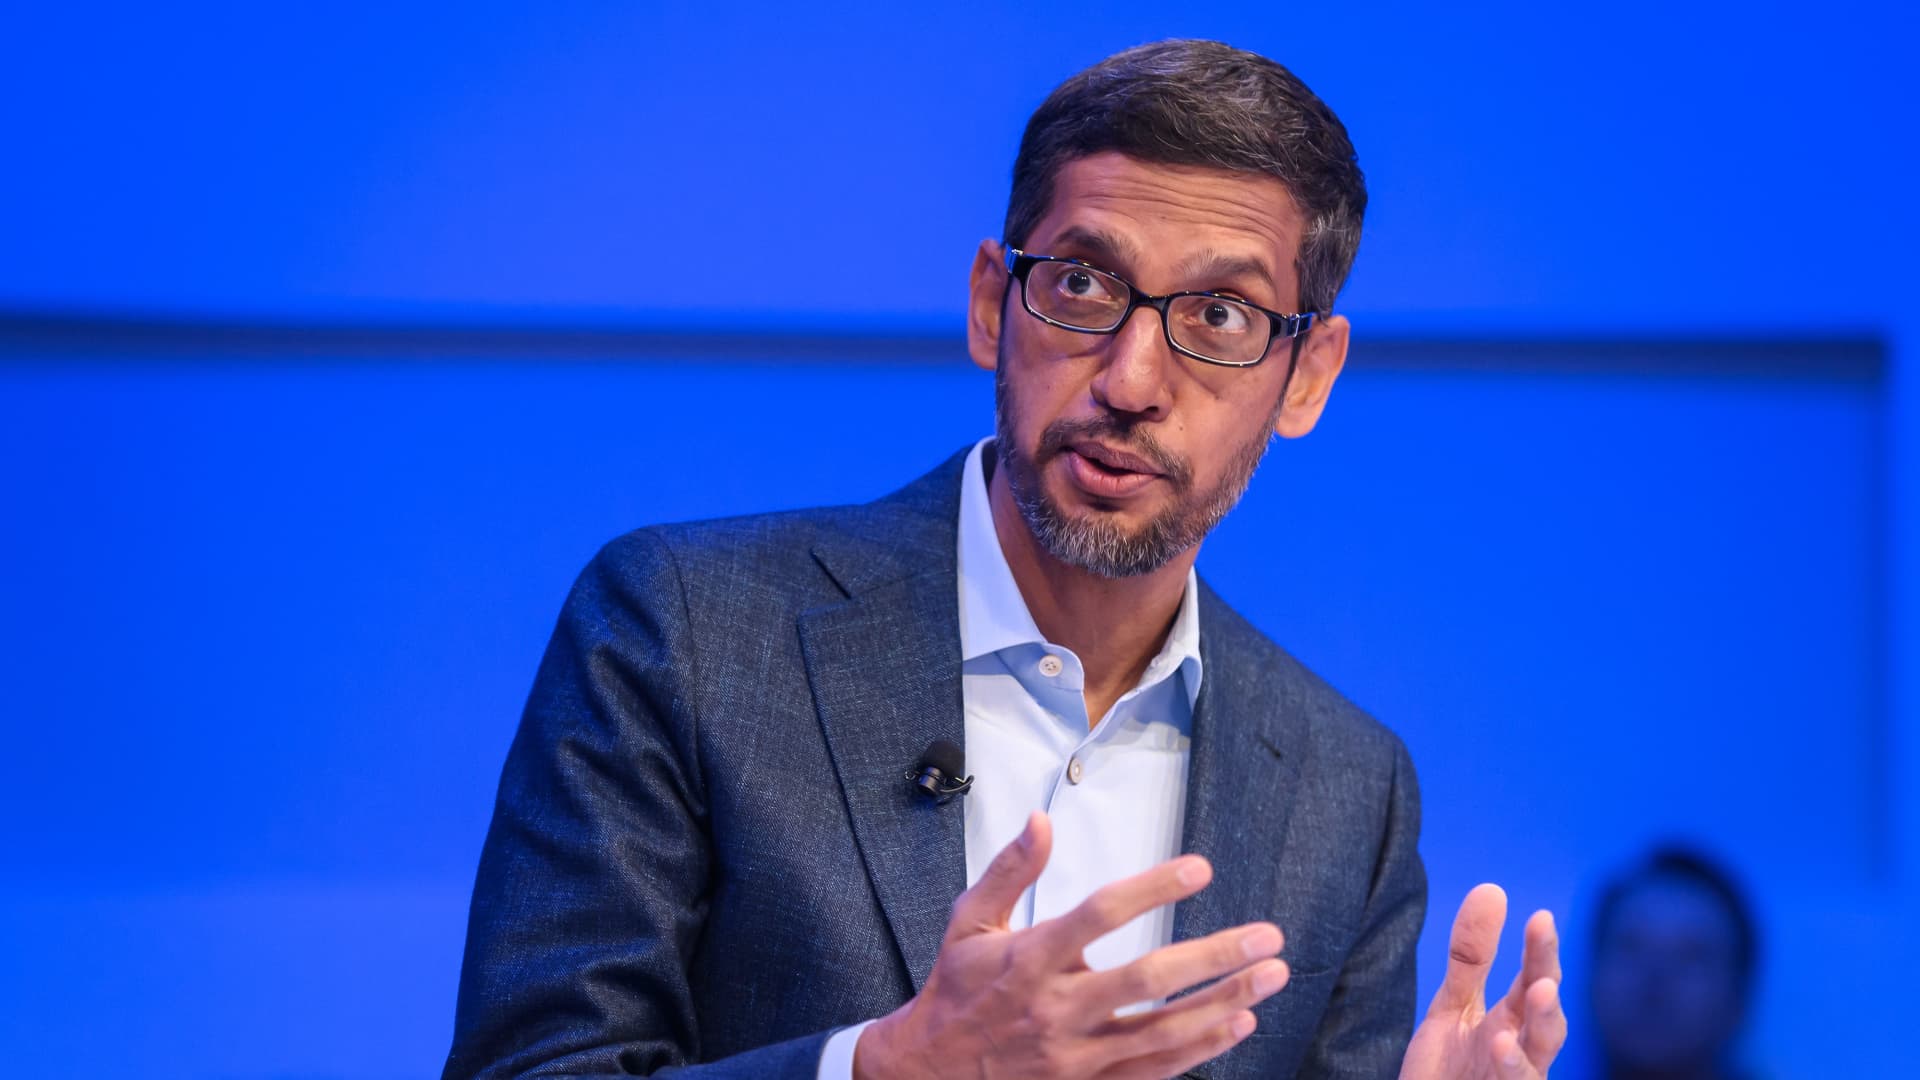 Google CEO promises new AI features are coming to search 'very soon' amid competition from ChatGPT